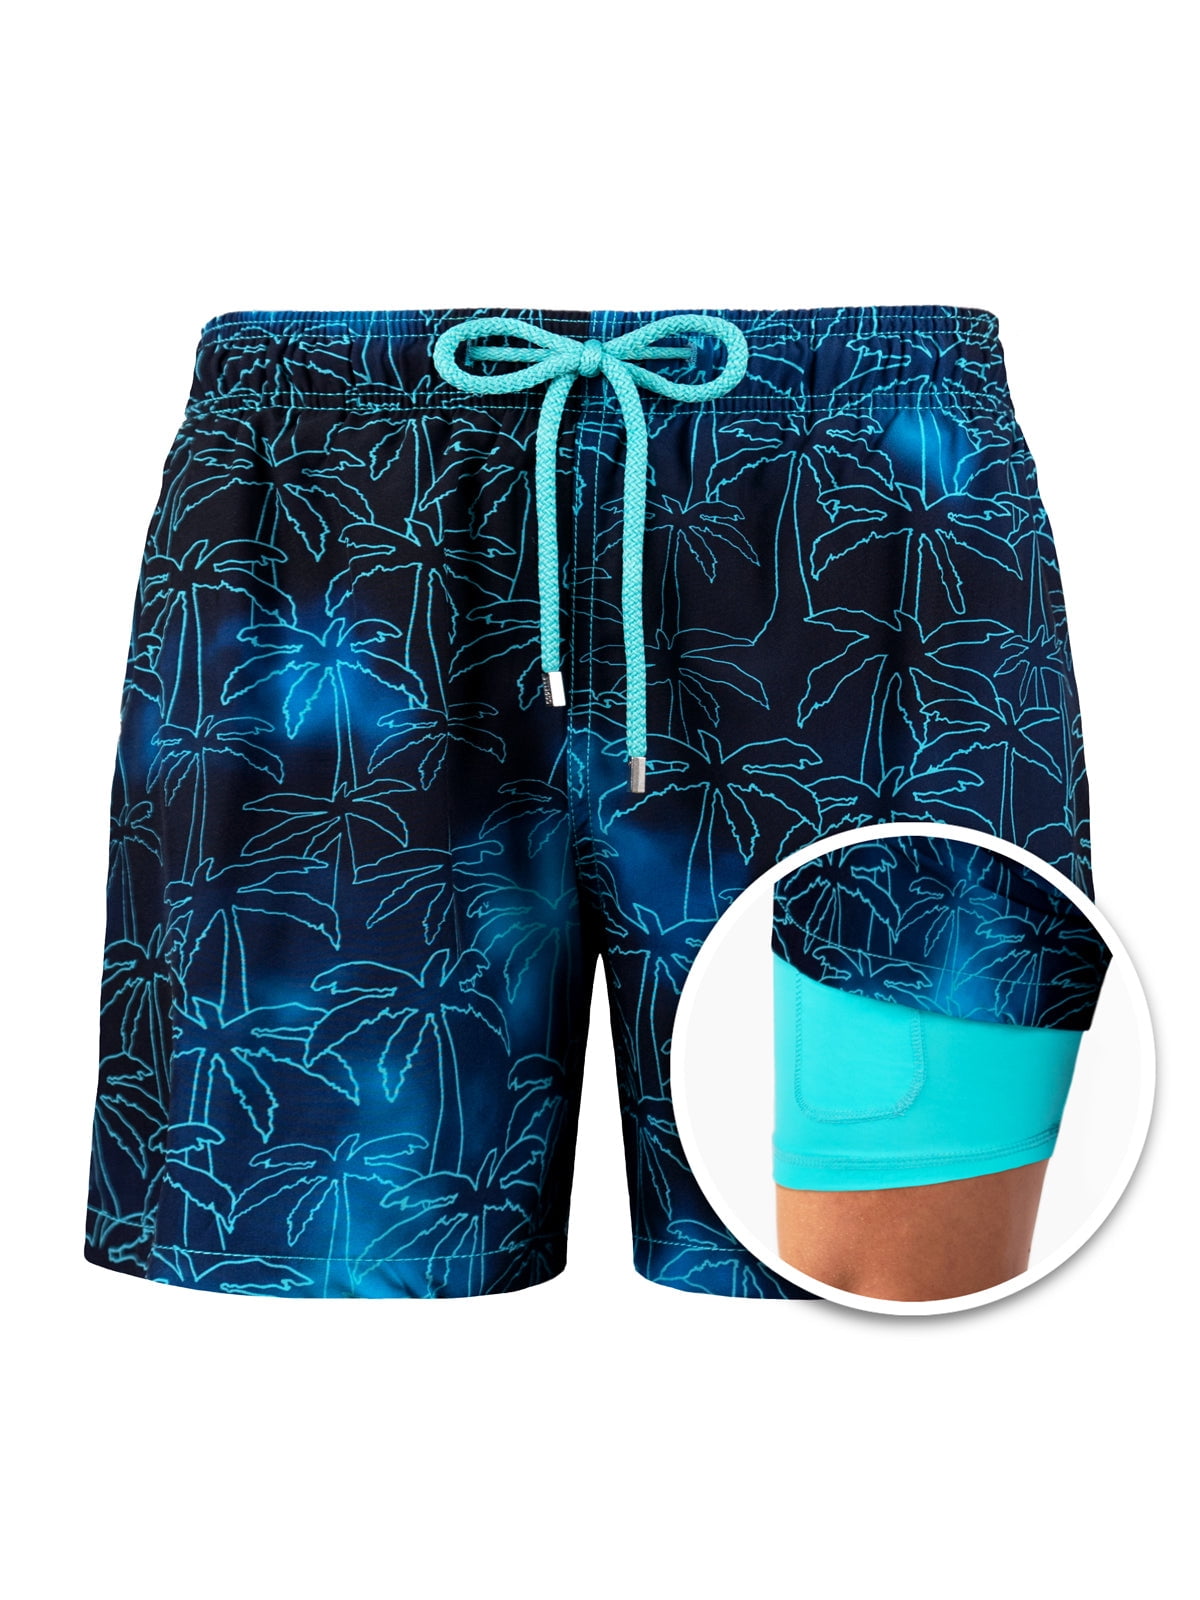 Inadays Men's Swim Trunks with Mesh Lining Quick Dry Sports Shorts ...